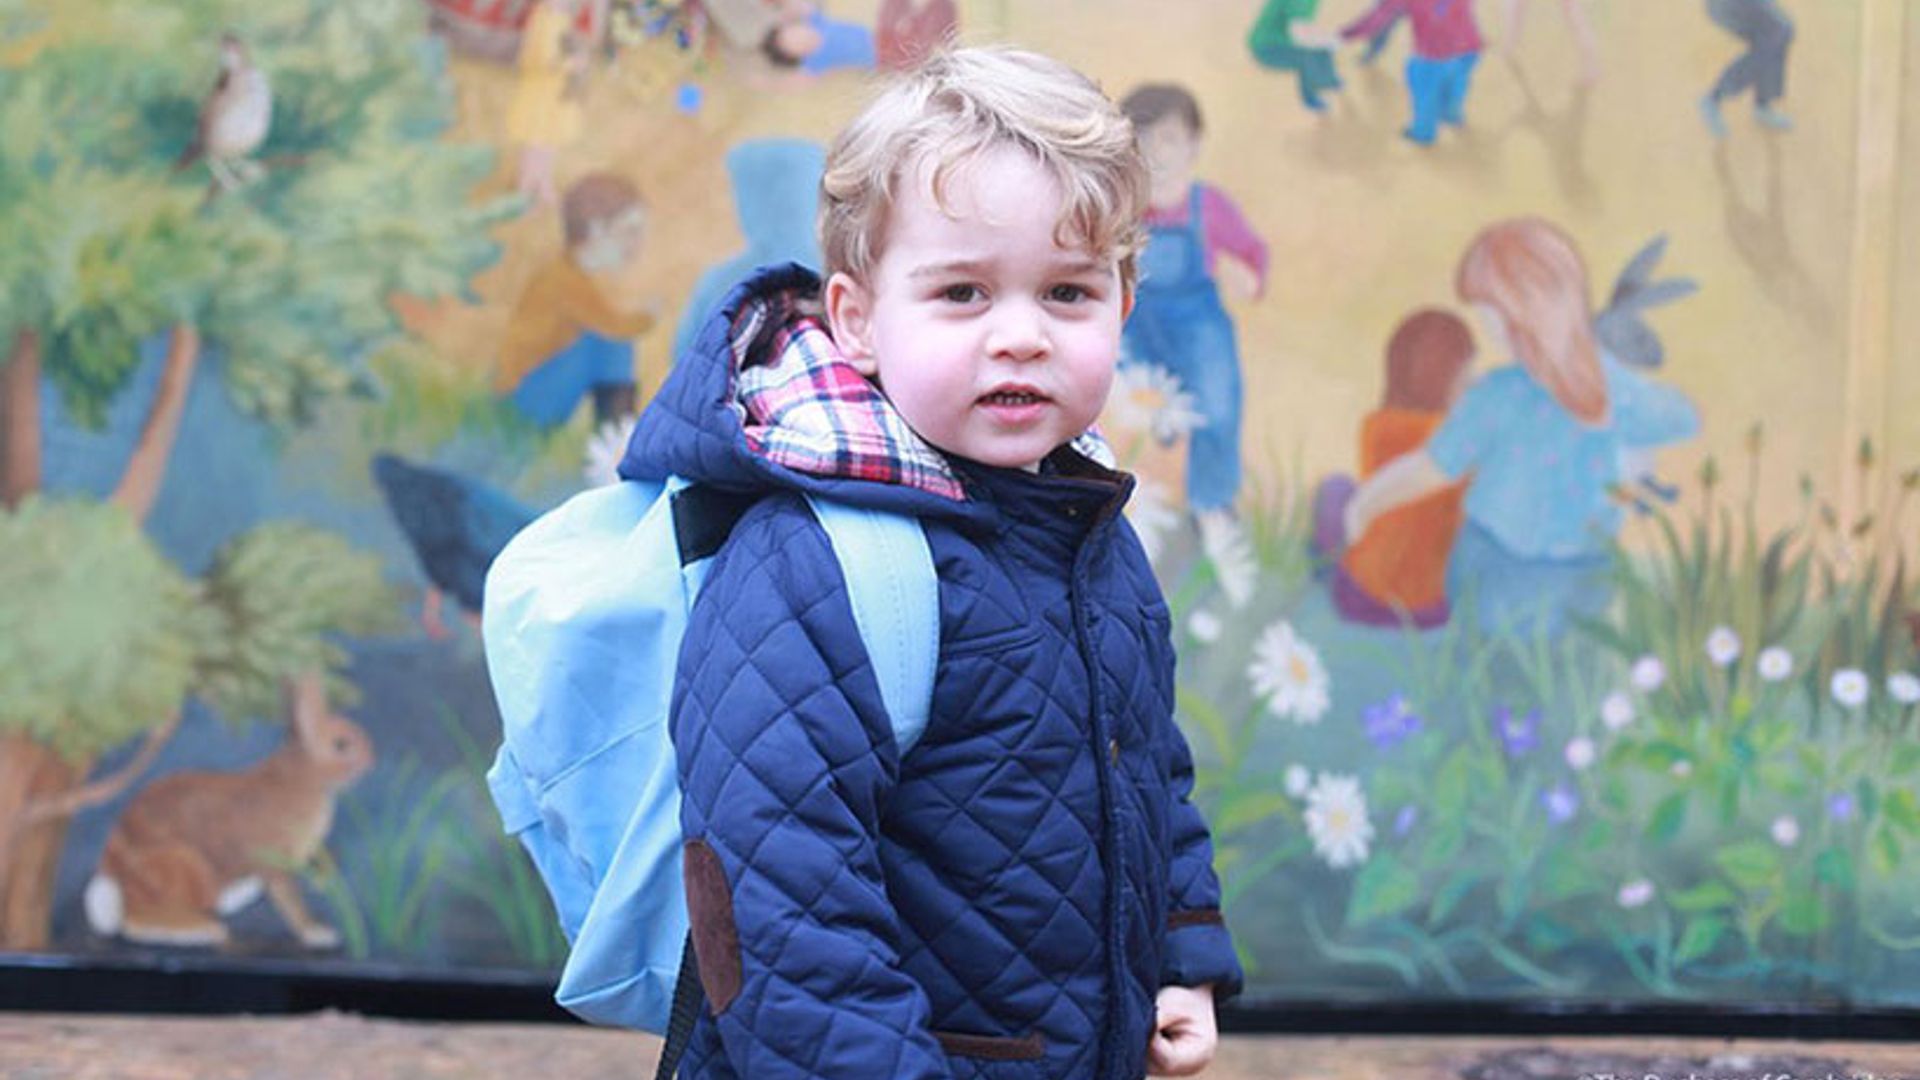 Prince George's school debut inspires back to school shoe deals for children with the same name